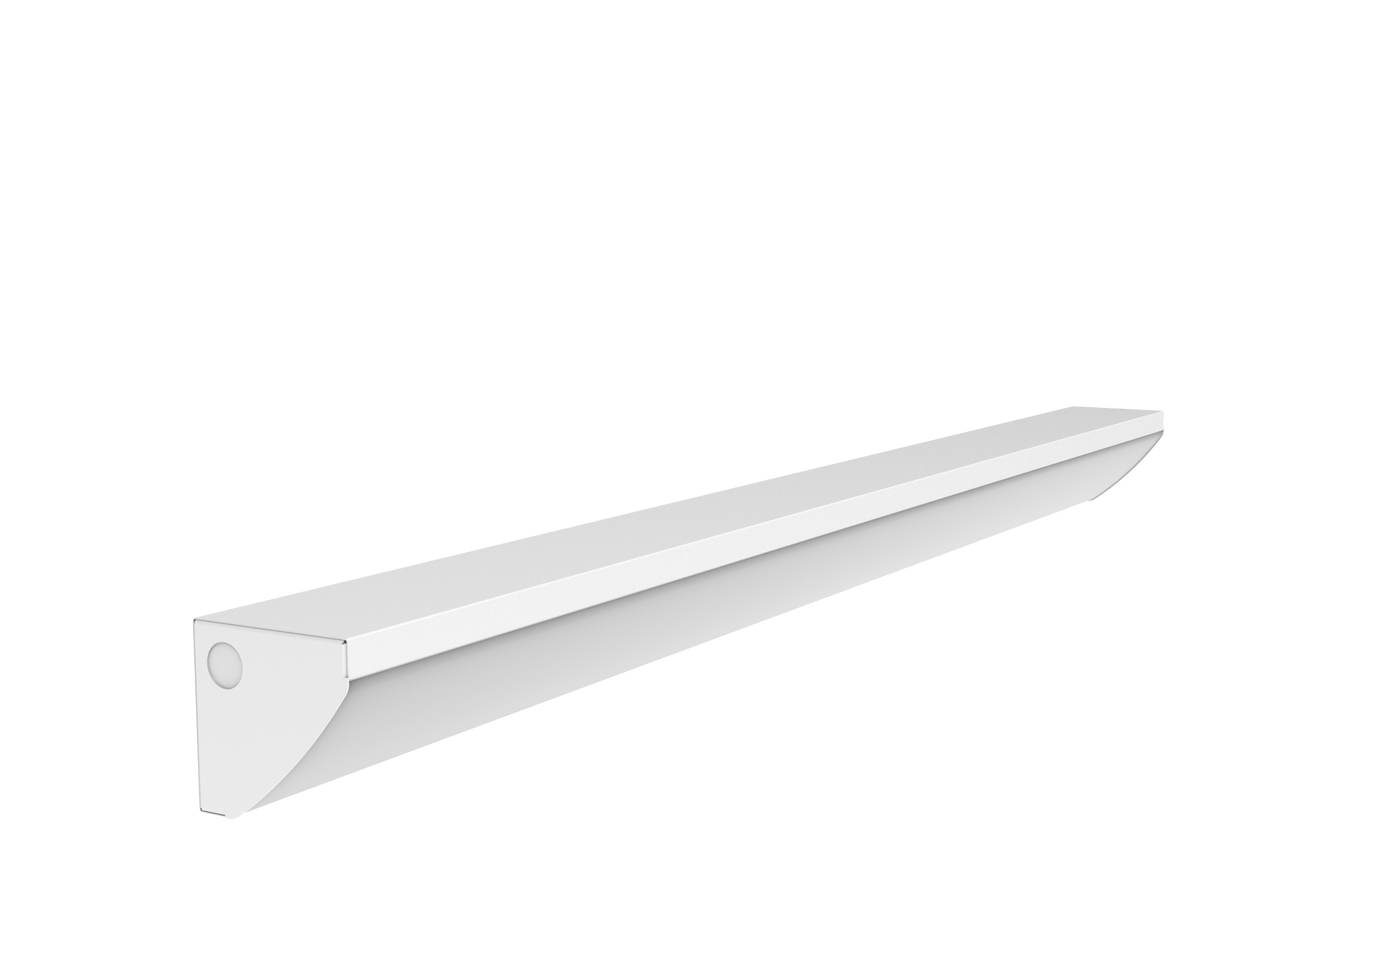 4 Foot LED Stairwell Light, 4600 Lumen Max, Wattage and CCT Selectable, 120-277V